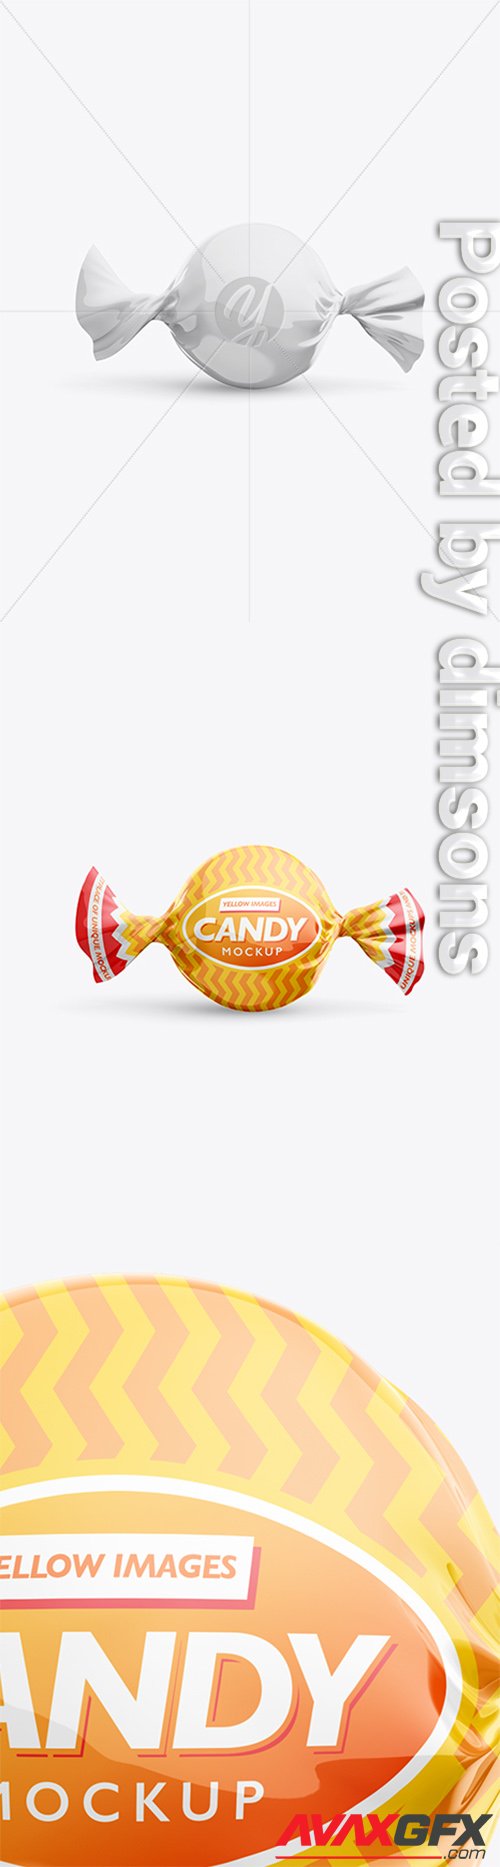 Candy Mockup - Front View 25828